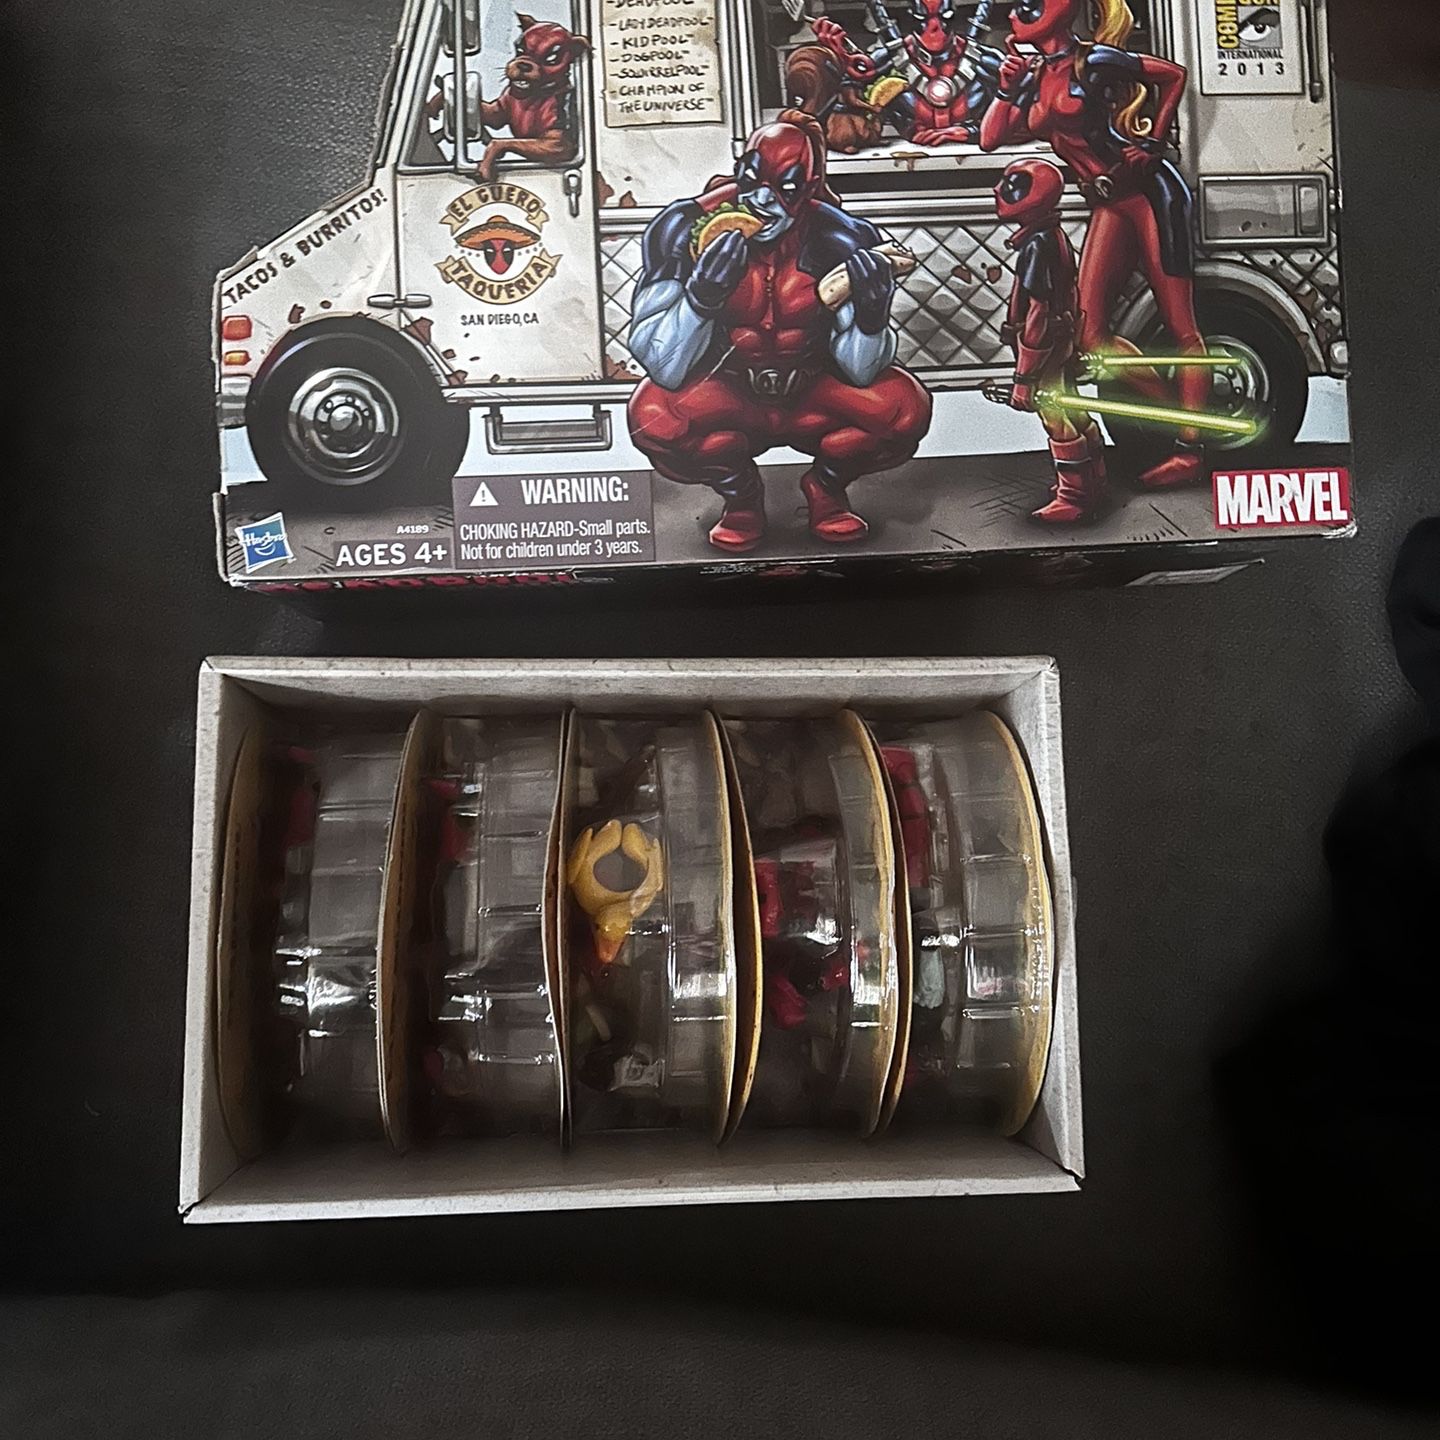 2013 SAN DIEGO COMIC CON MARVEL UNIVERSE DEADPOOL CORPS 6-PACK